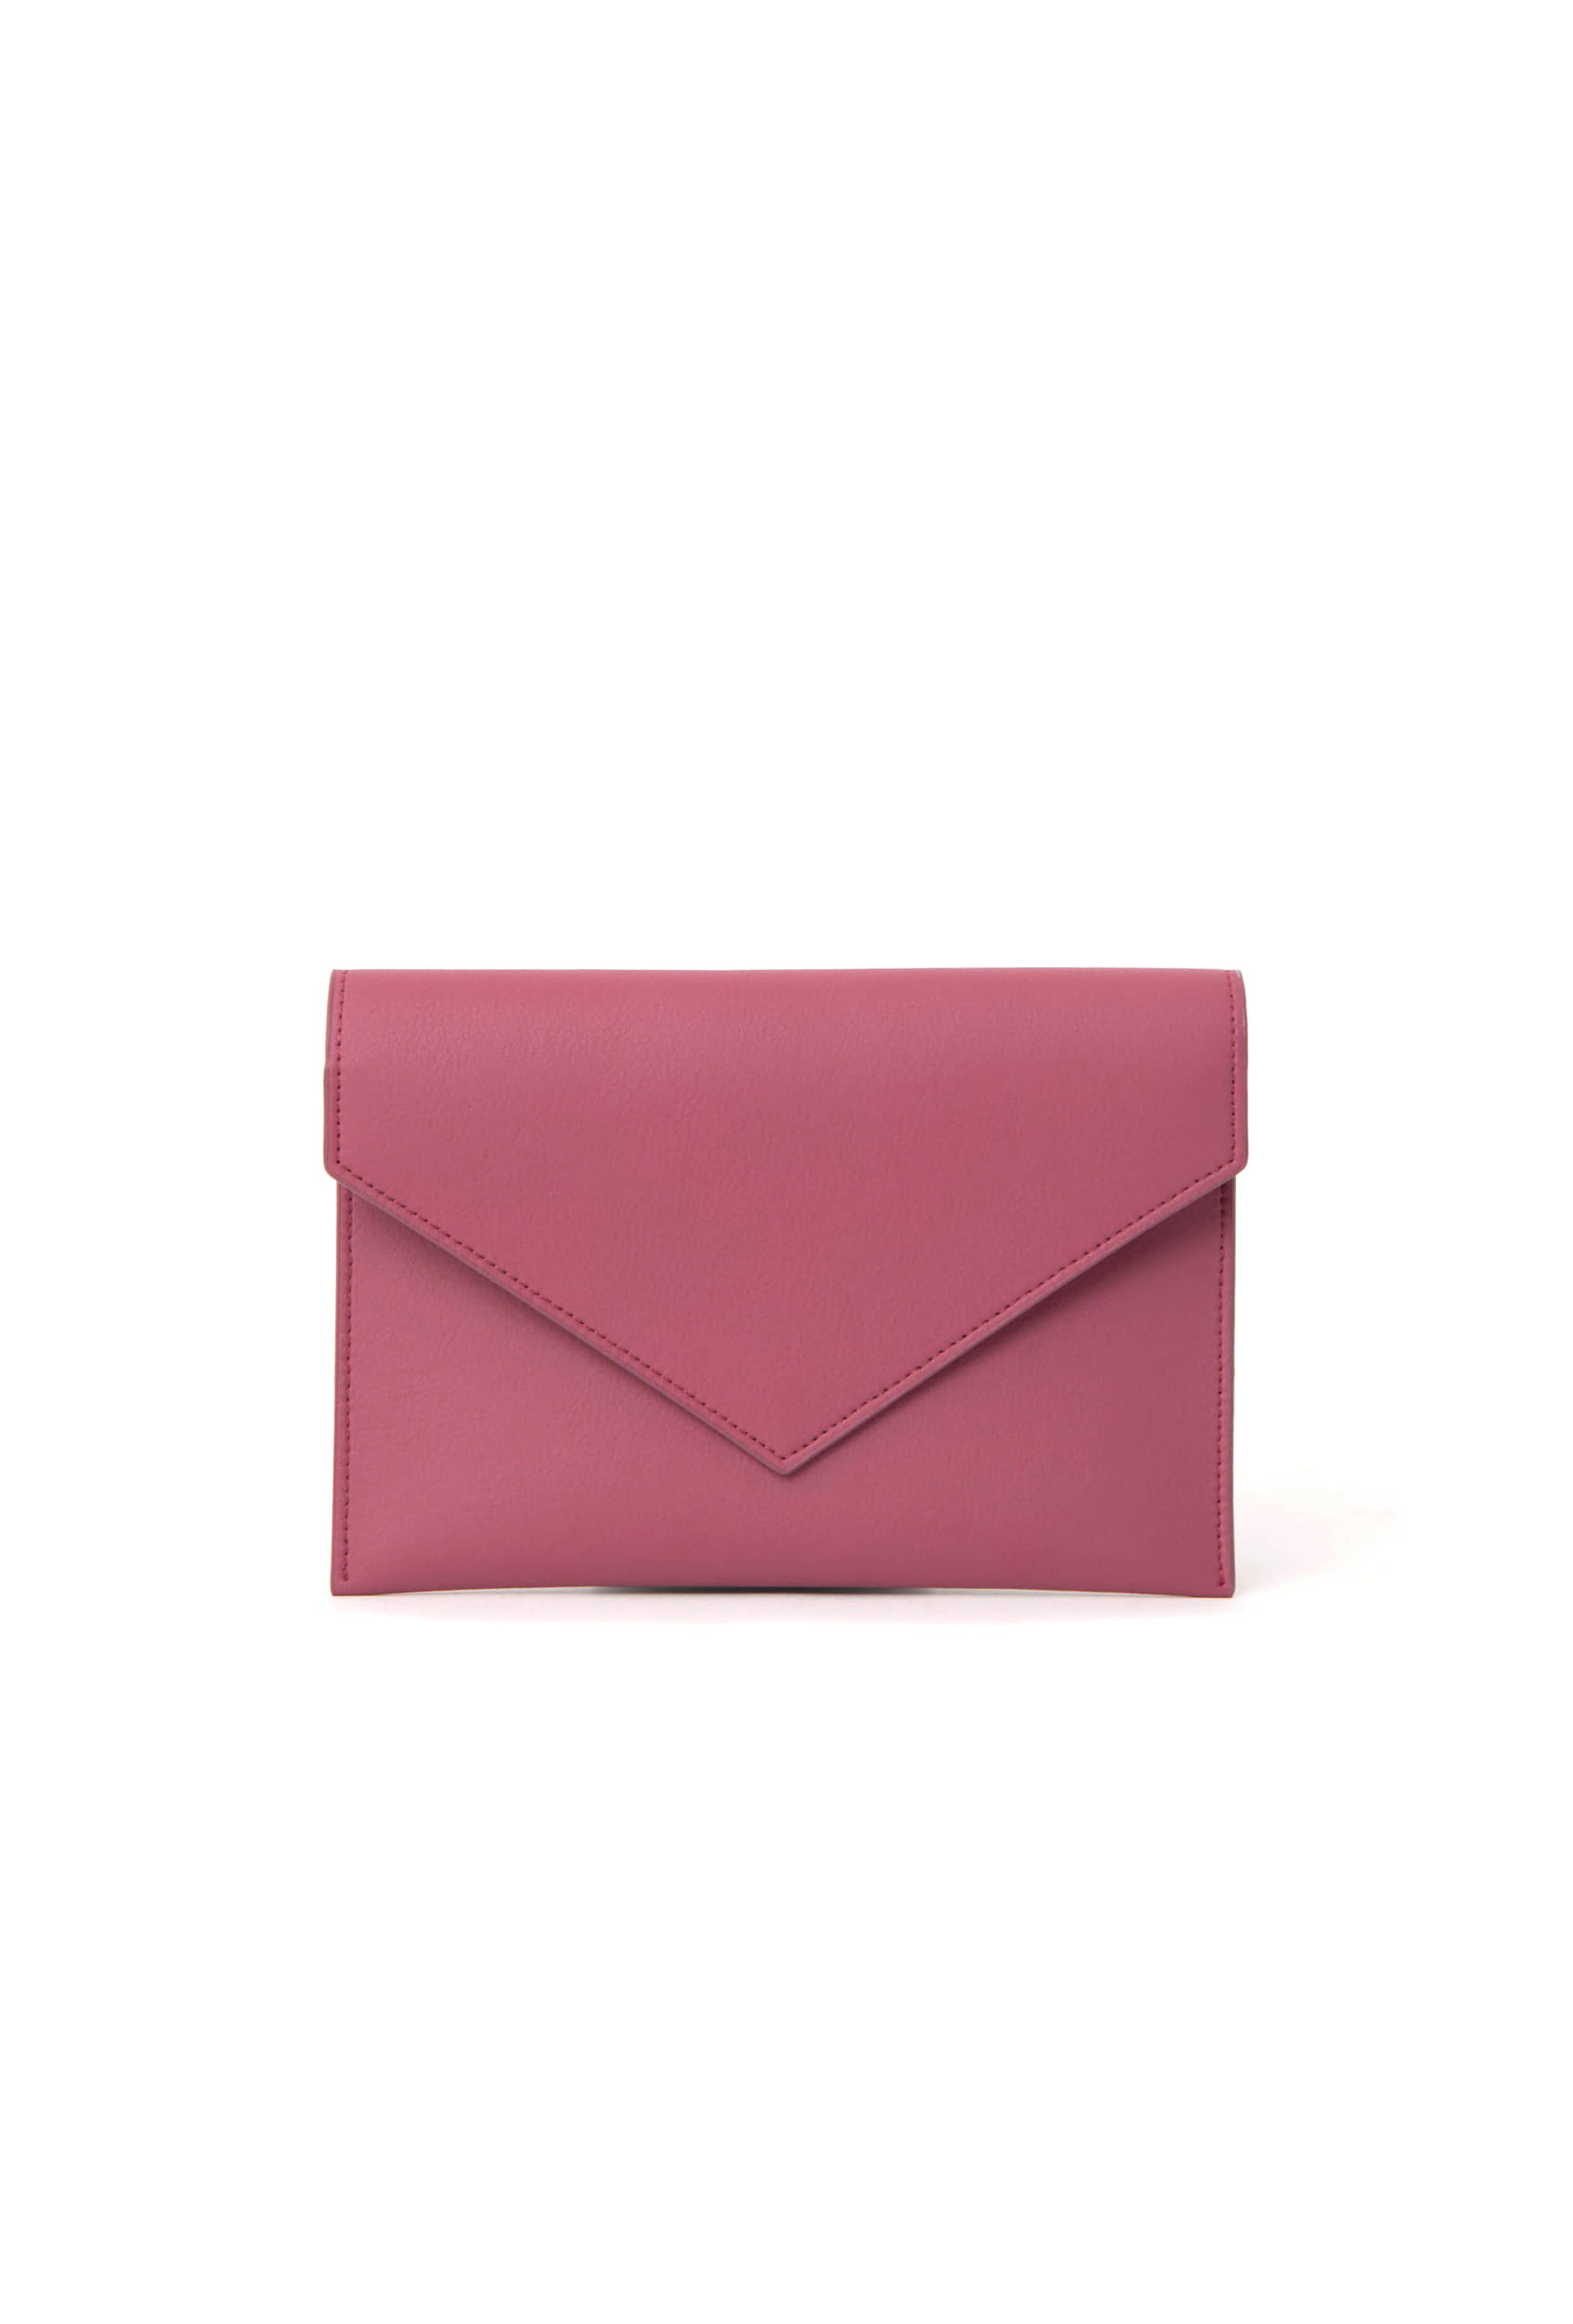 COSMETIC CLUTCH 05 Cherry Pink (pink)